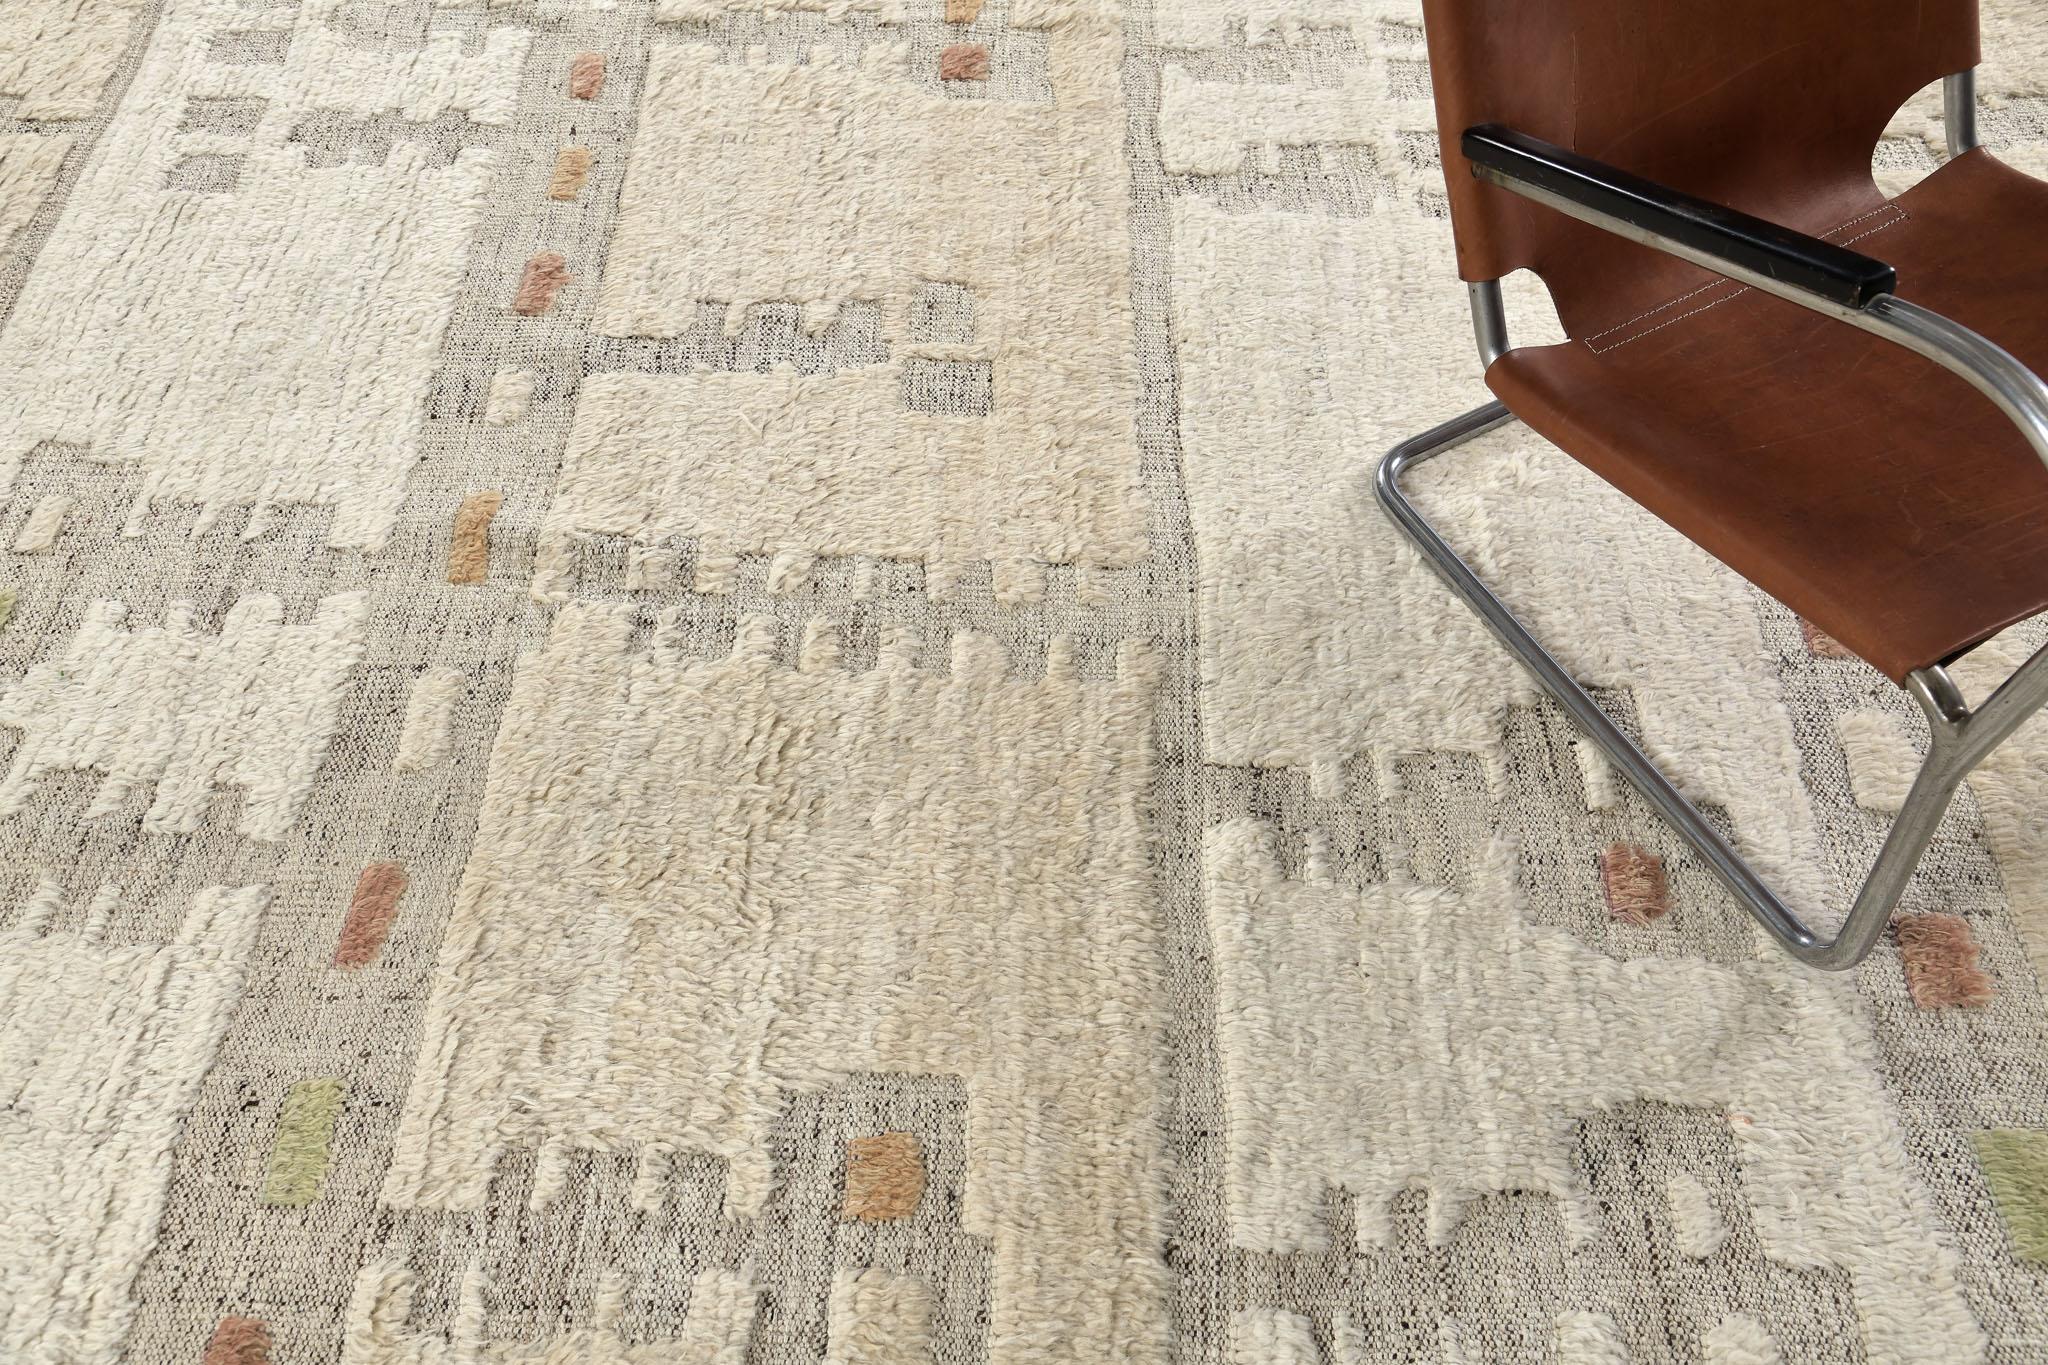 Falt features a sense of comfort and coziness. This wonderful rug boasts its natural color scheme with checkered accent patterns and symbolic motifs. Just also means 'coast' that was consciously designed and attentively woven for a serene coastal